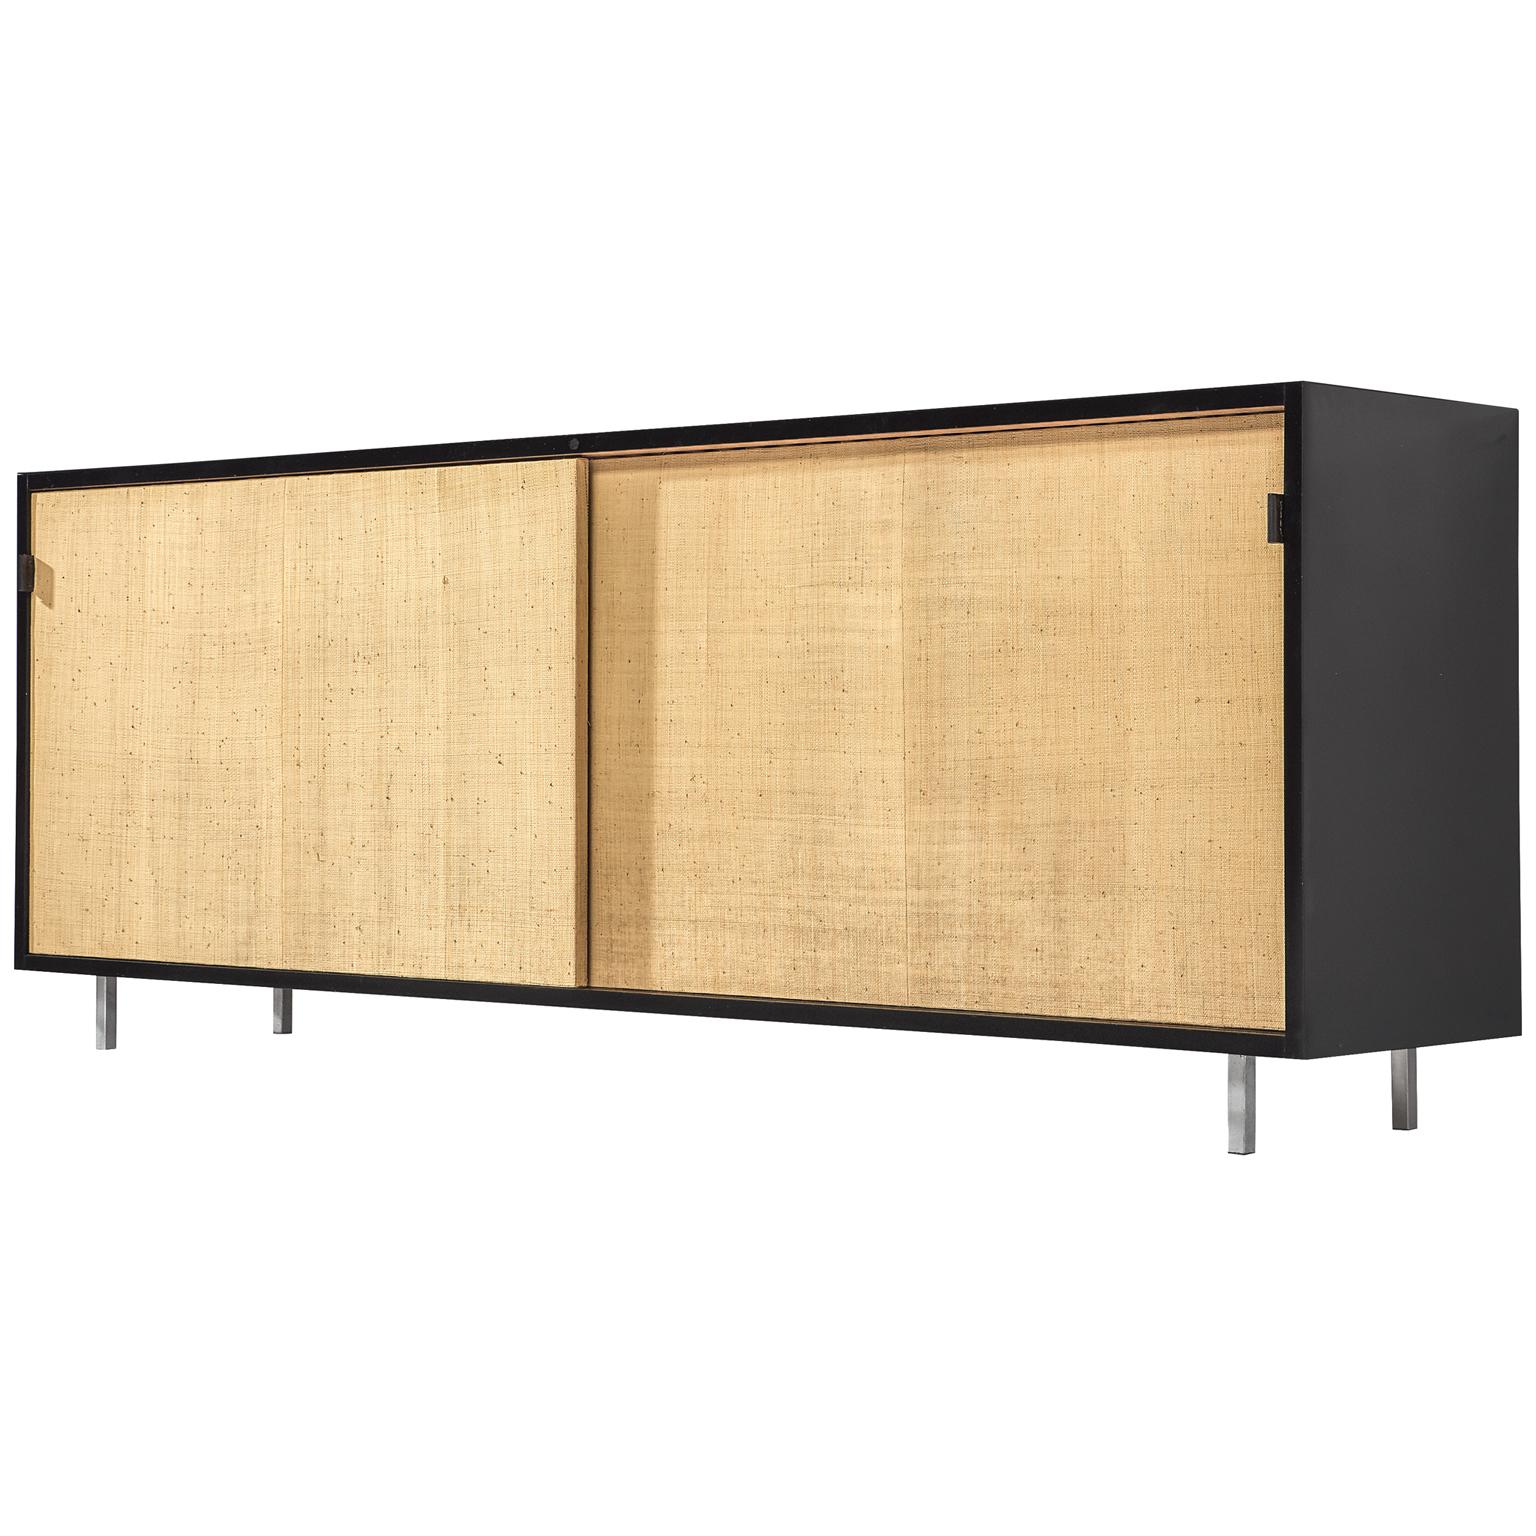 Early Florence Knoll Credenza for Knoll Head Office, United States, 1961